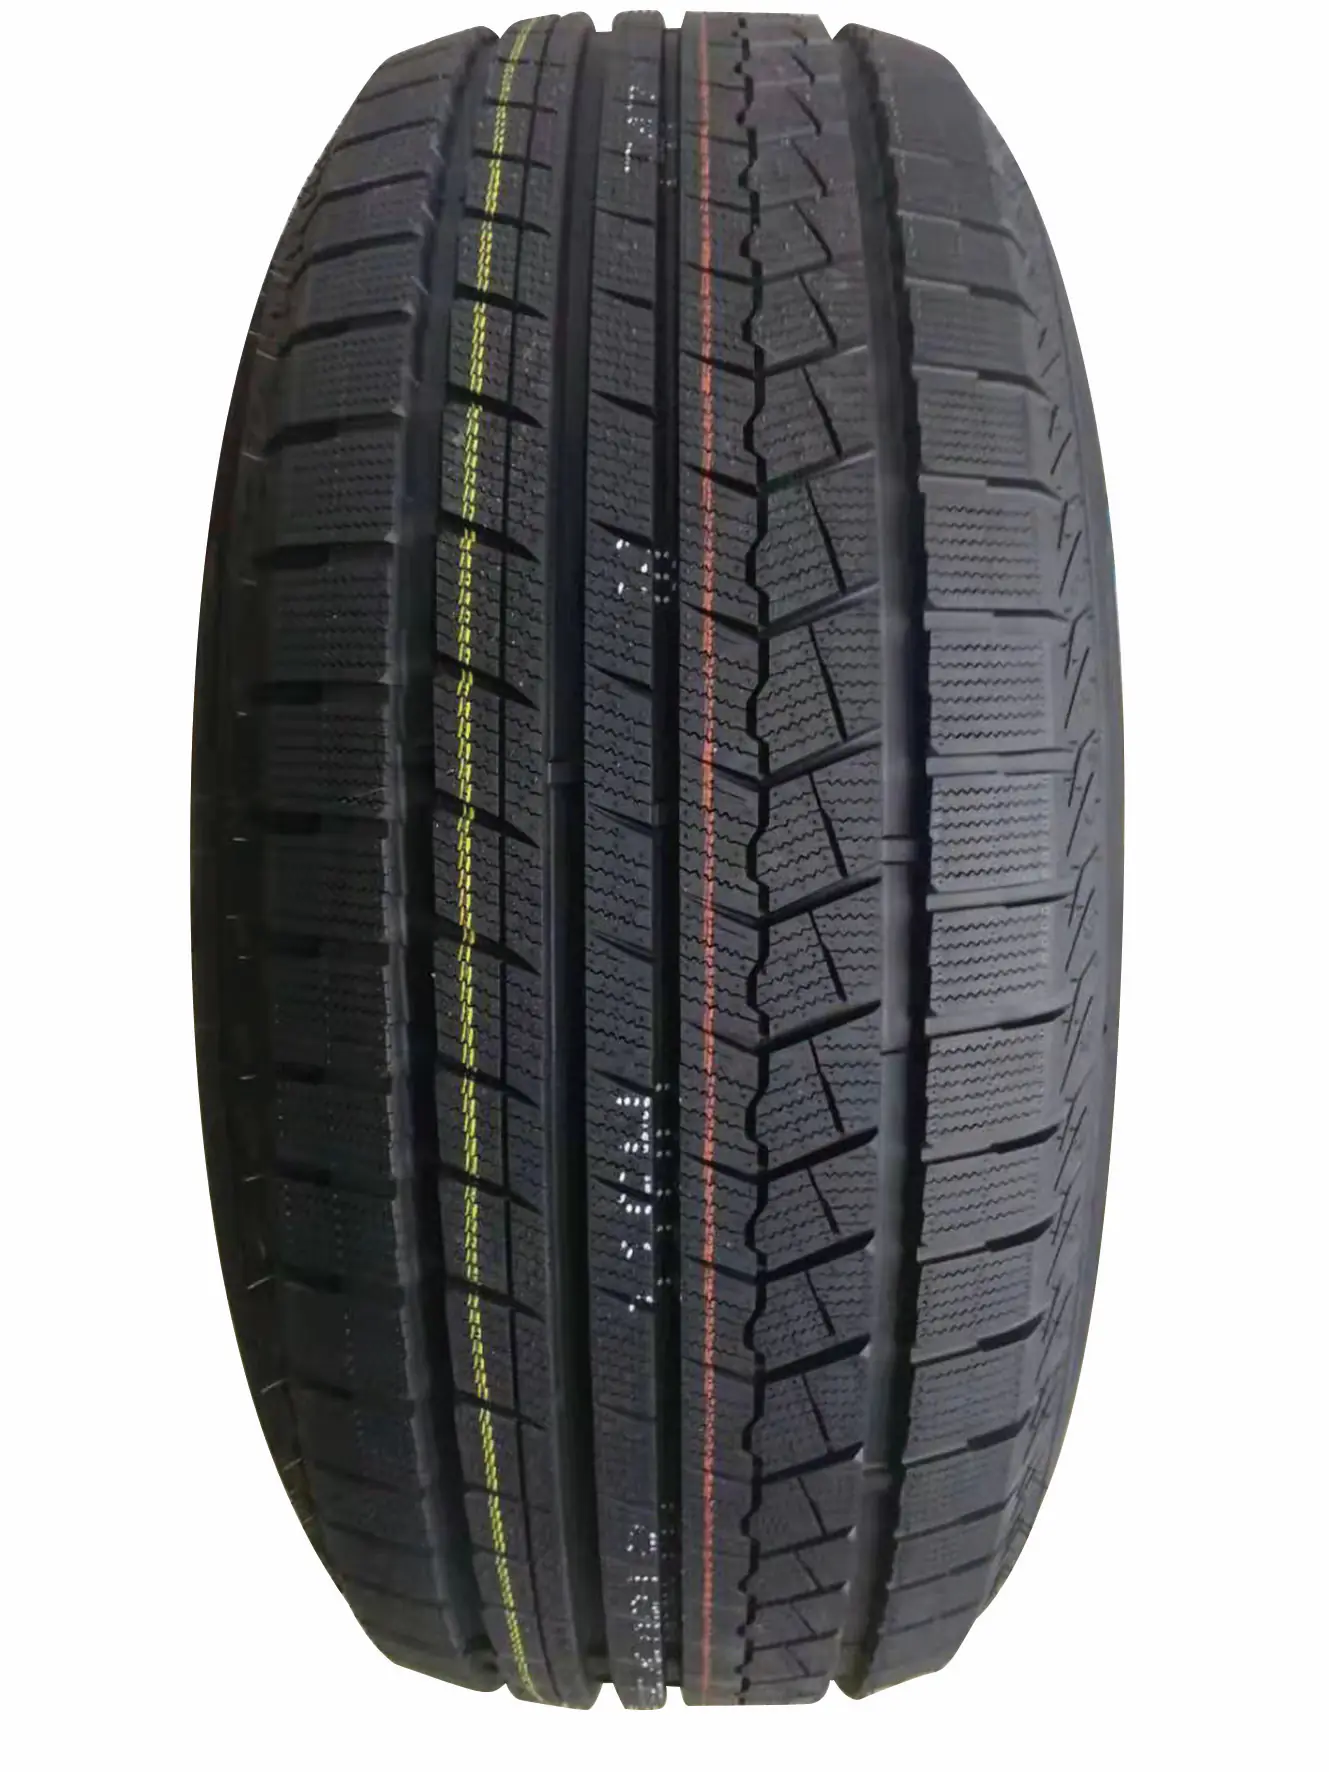 T-Tyre T-Tyre 155/70 R13 75T Thirtytwo pneumatici nuovi Invernale 